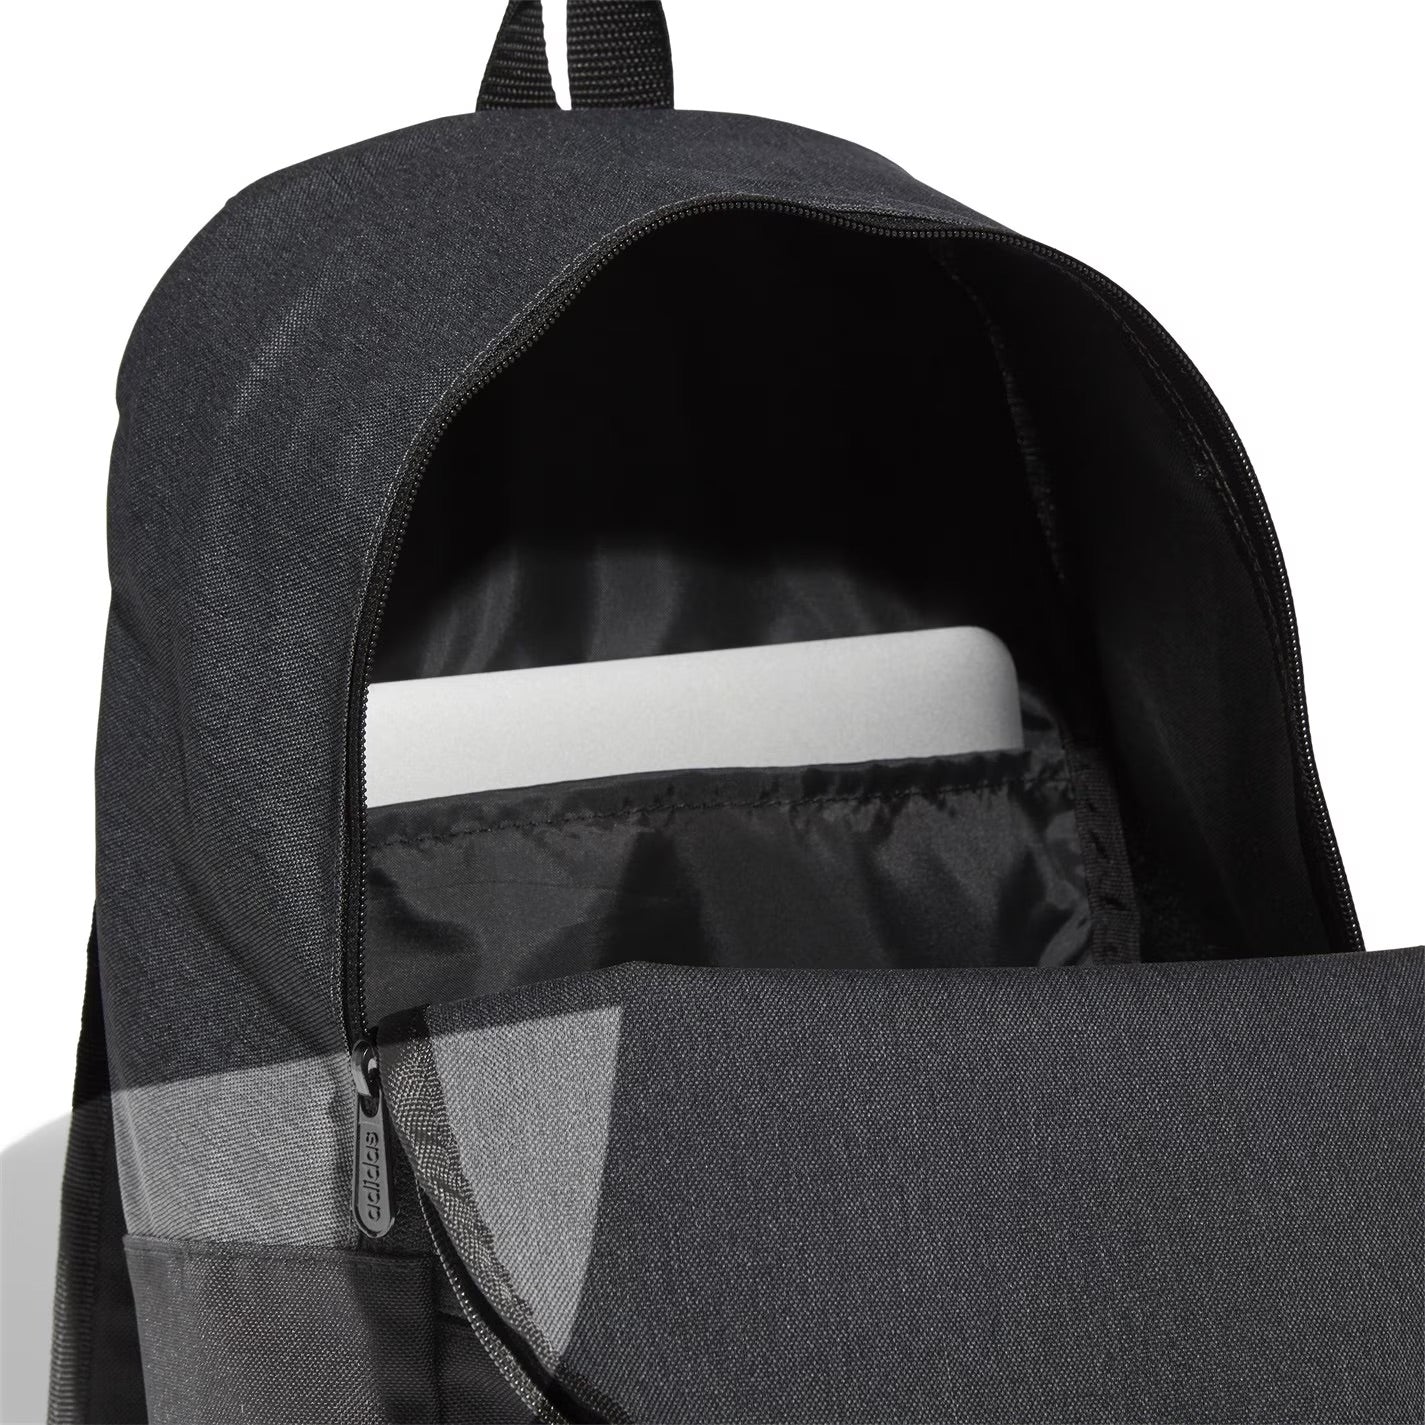 Adidas Daily Backpack in black/gray